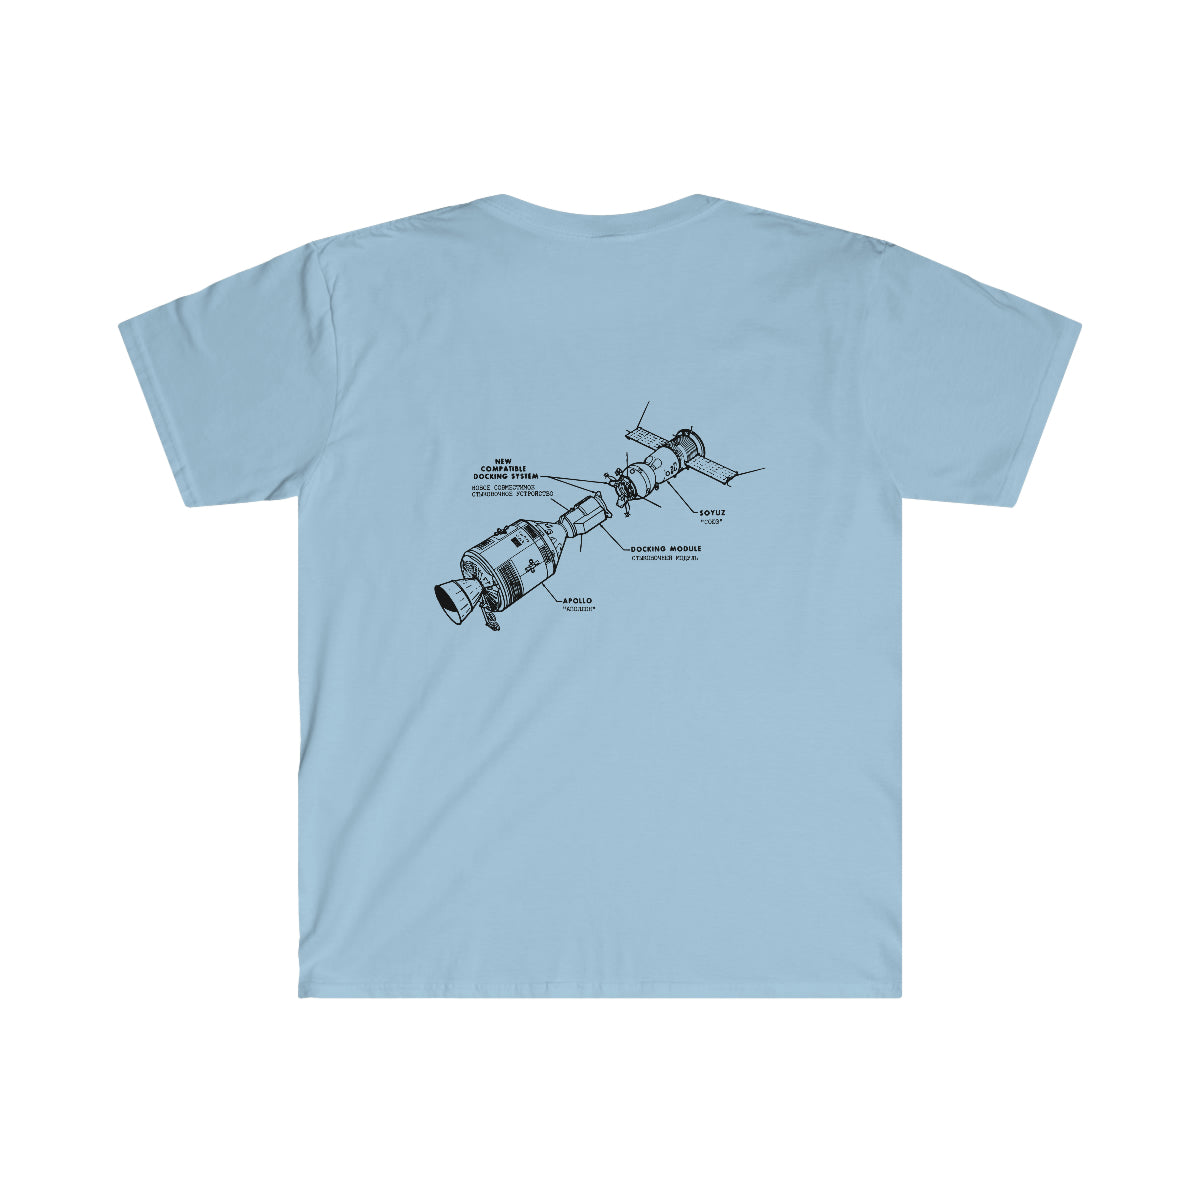 A Apollo Docking T-Shirt for the space enthusiast.